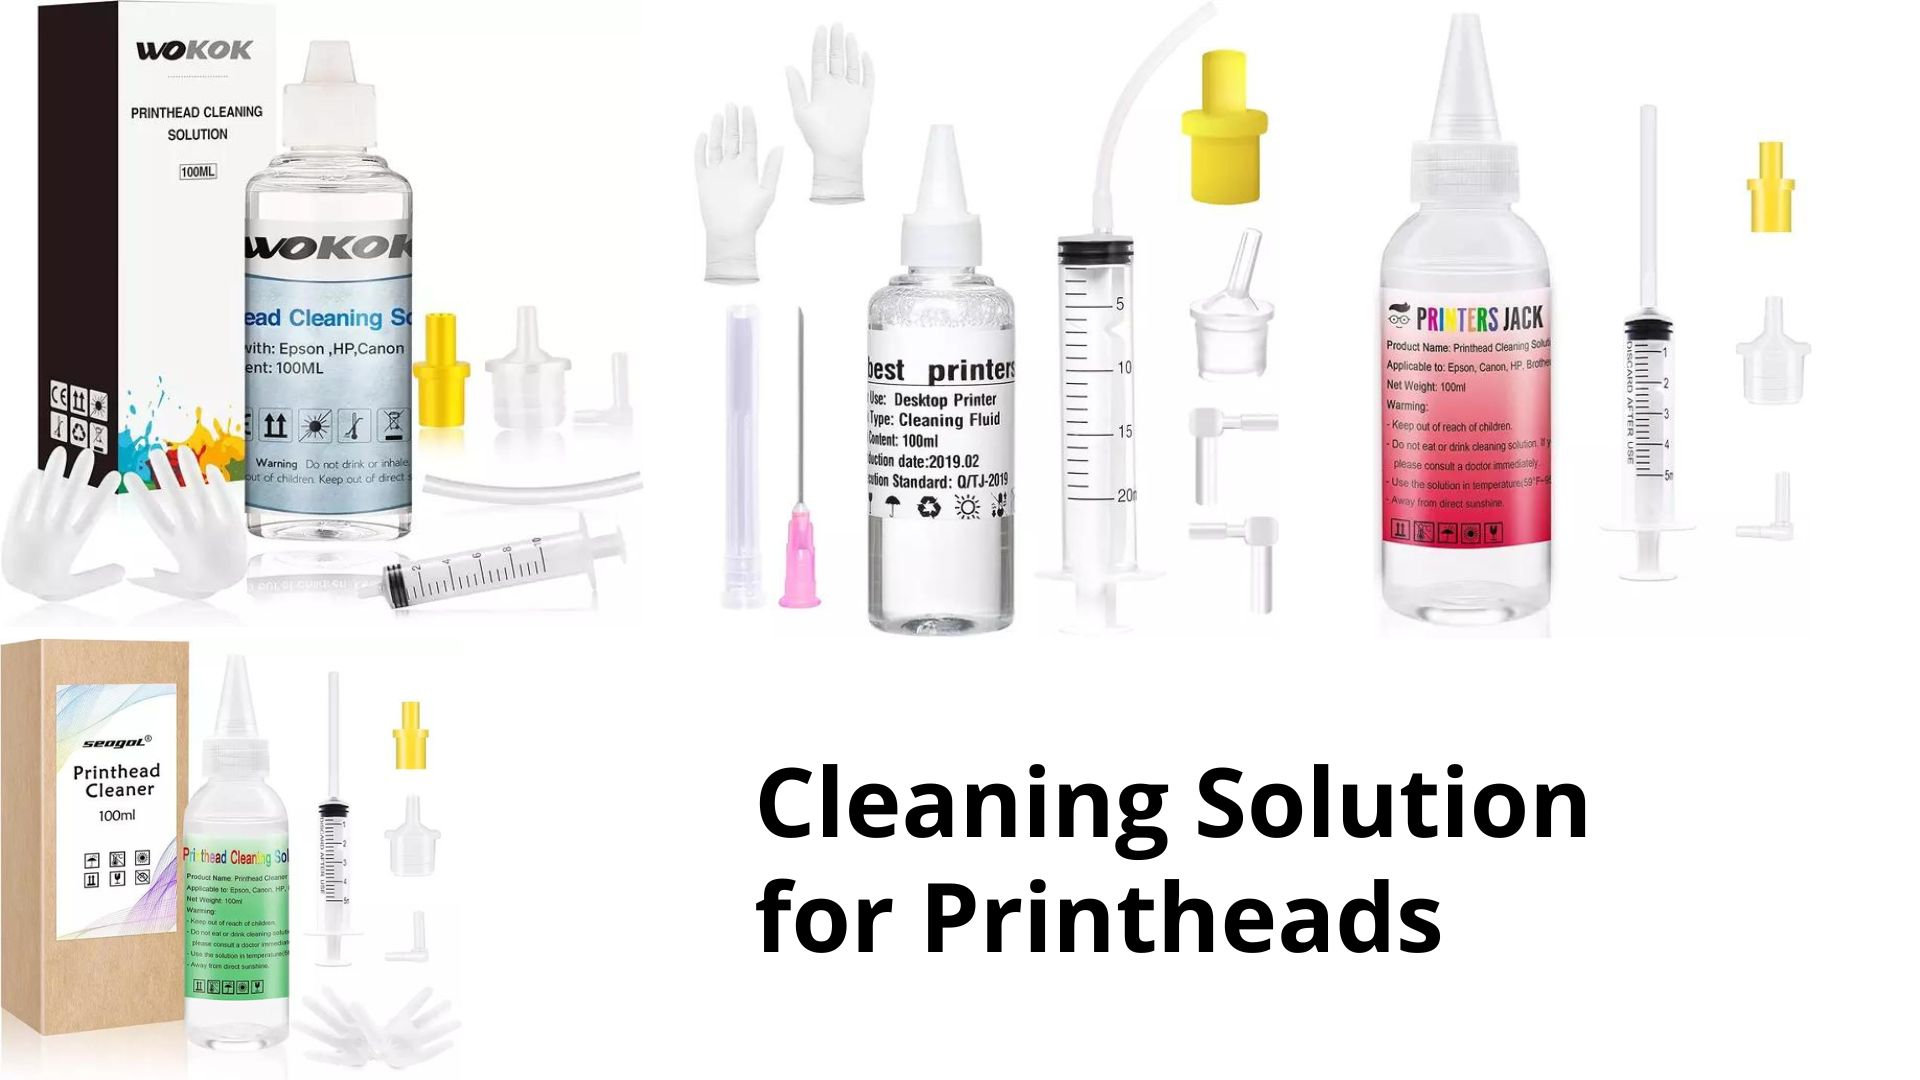 Cleaning Solution for Printheads